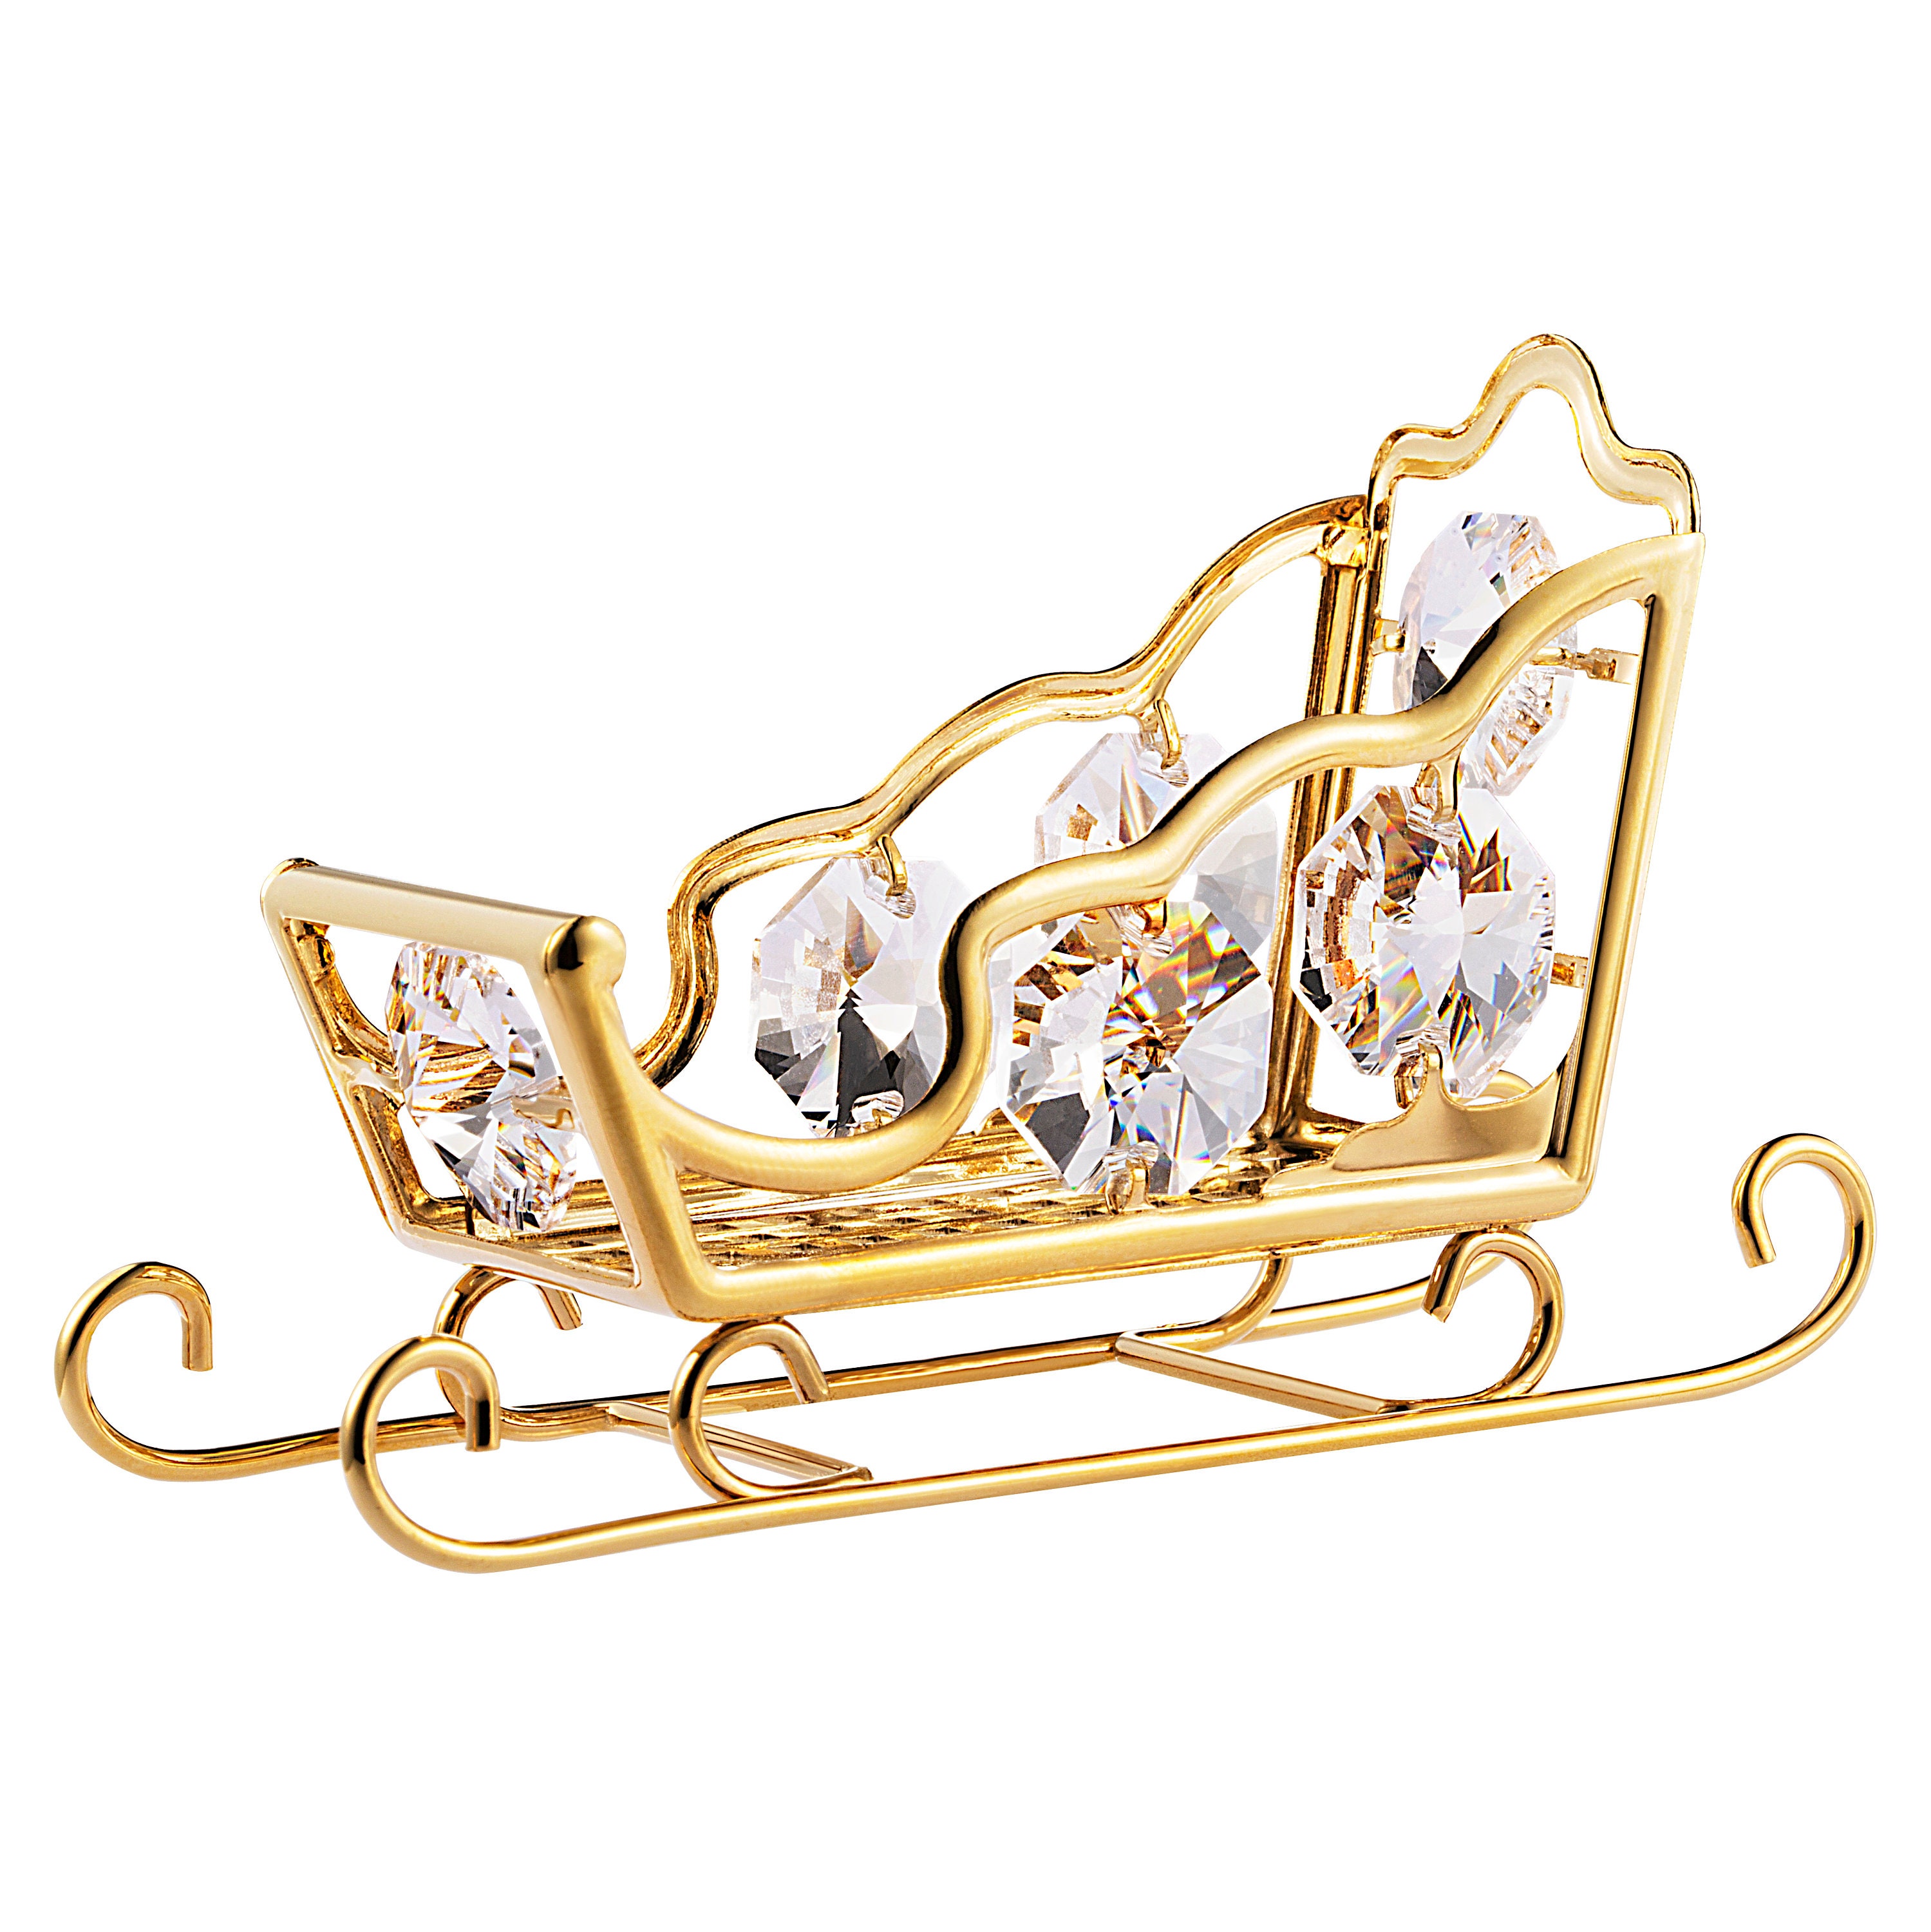 Santa's Sleigh Queen Christmas Ornament – OhSoColorful Co.